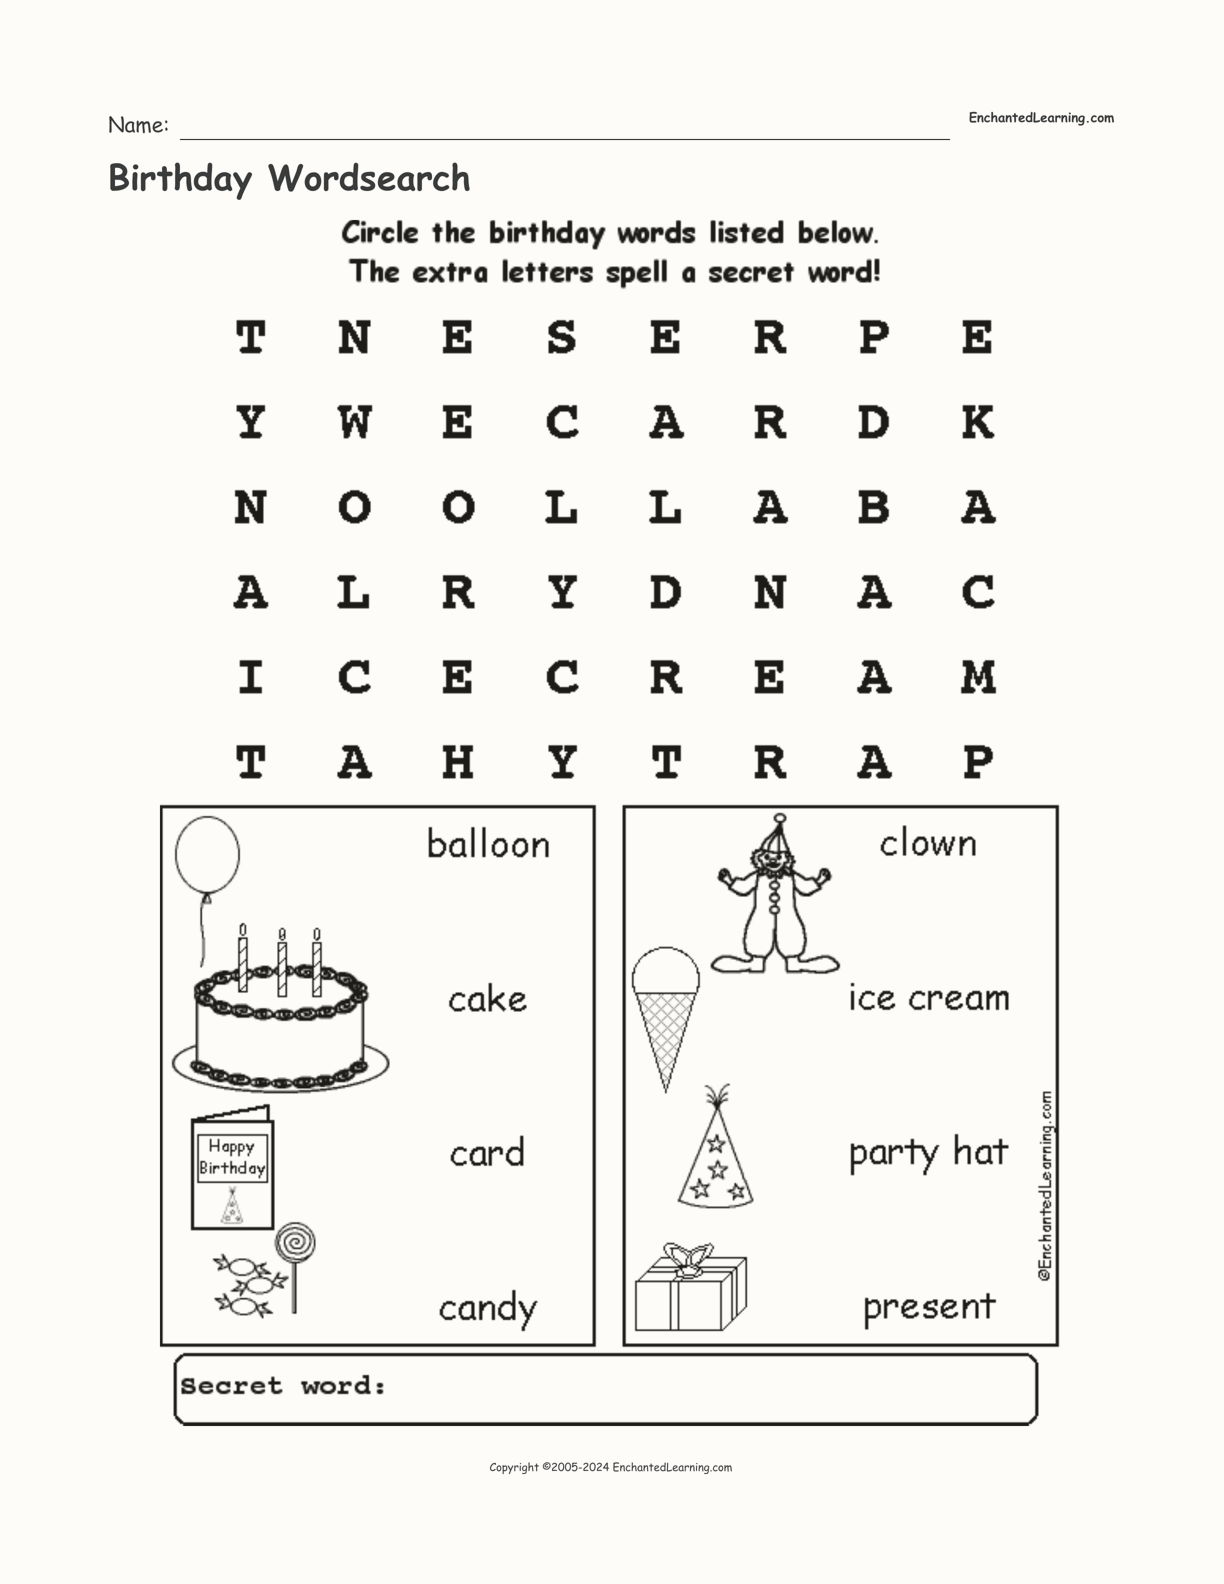 Birthday Wordsearch interactive worksheet page 1